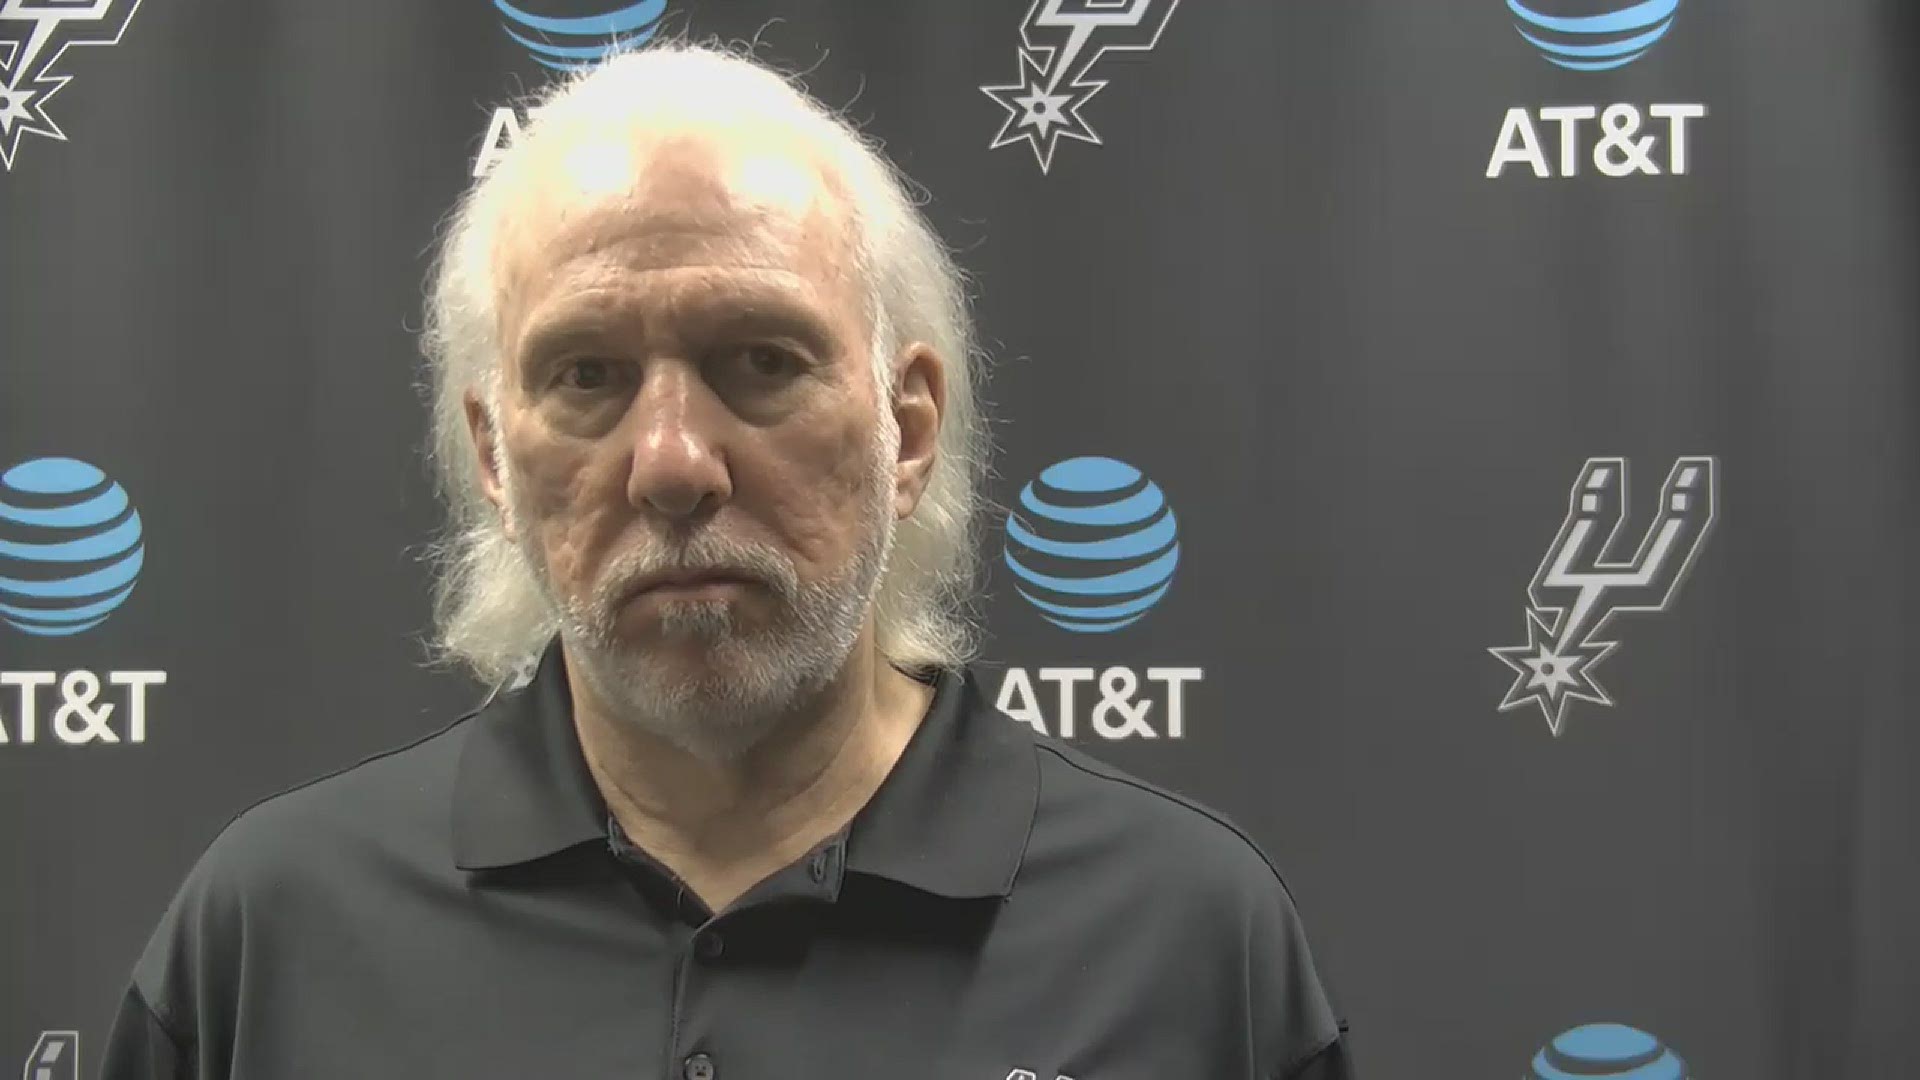 Popovich spoke about what it meant for his team to continue executing to fend off a few runs by the Pistons in the second half.